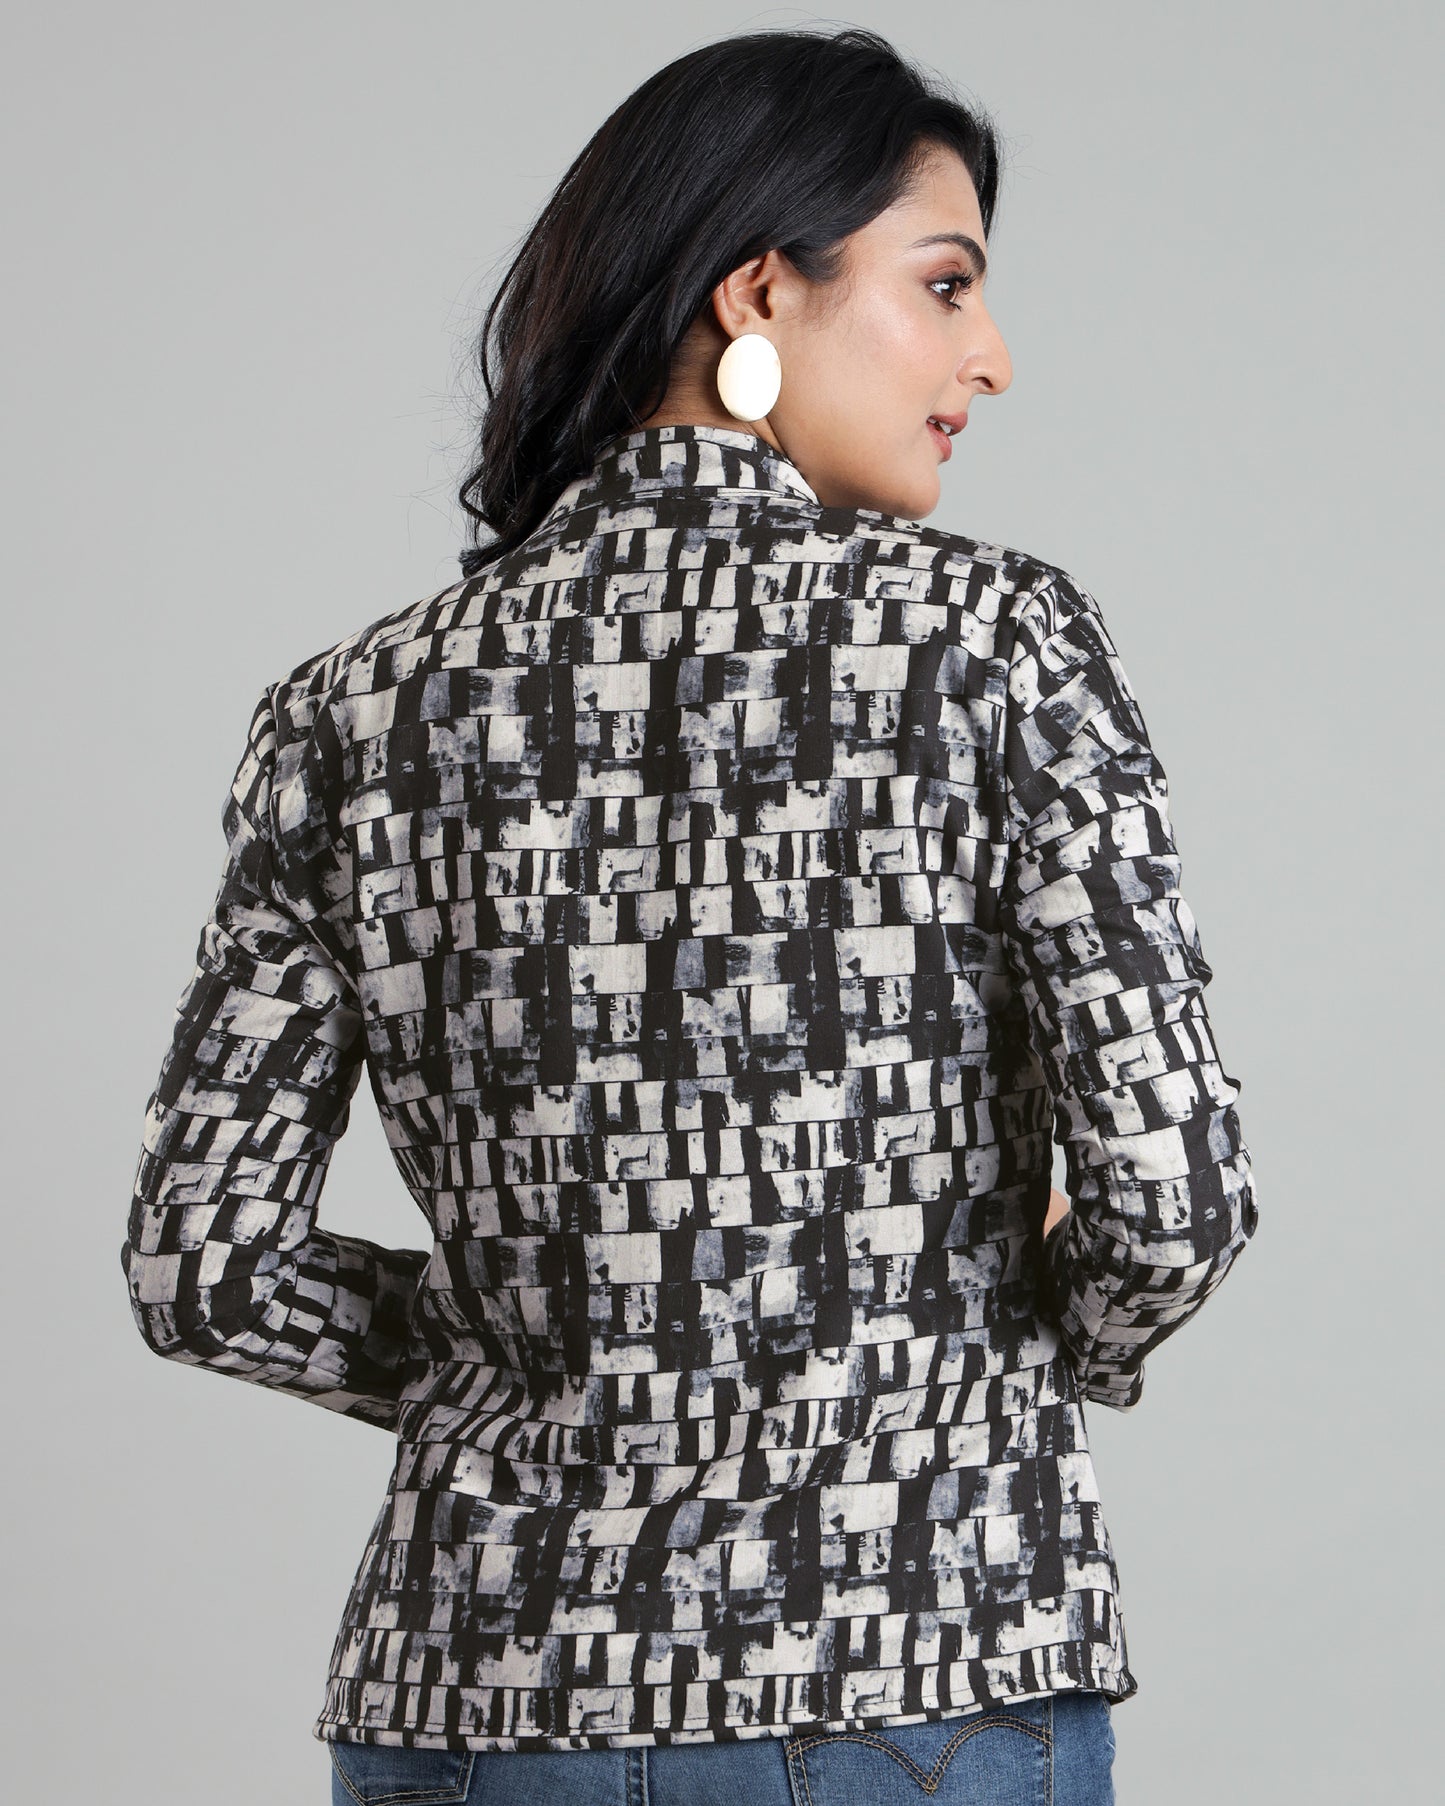 Abstract Opulence: Luxurious Jacket For Women